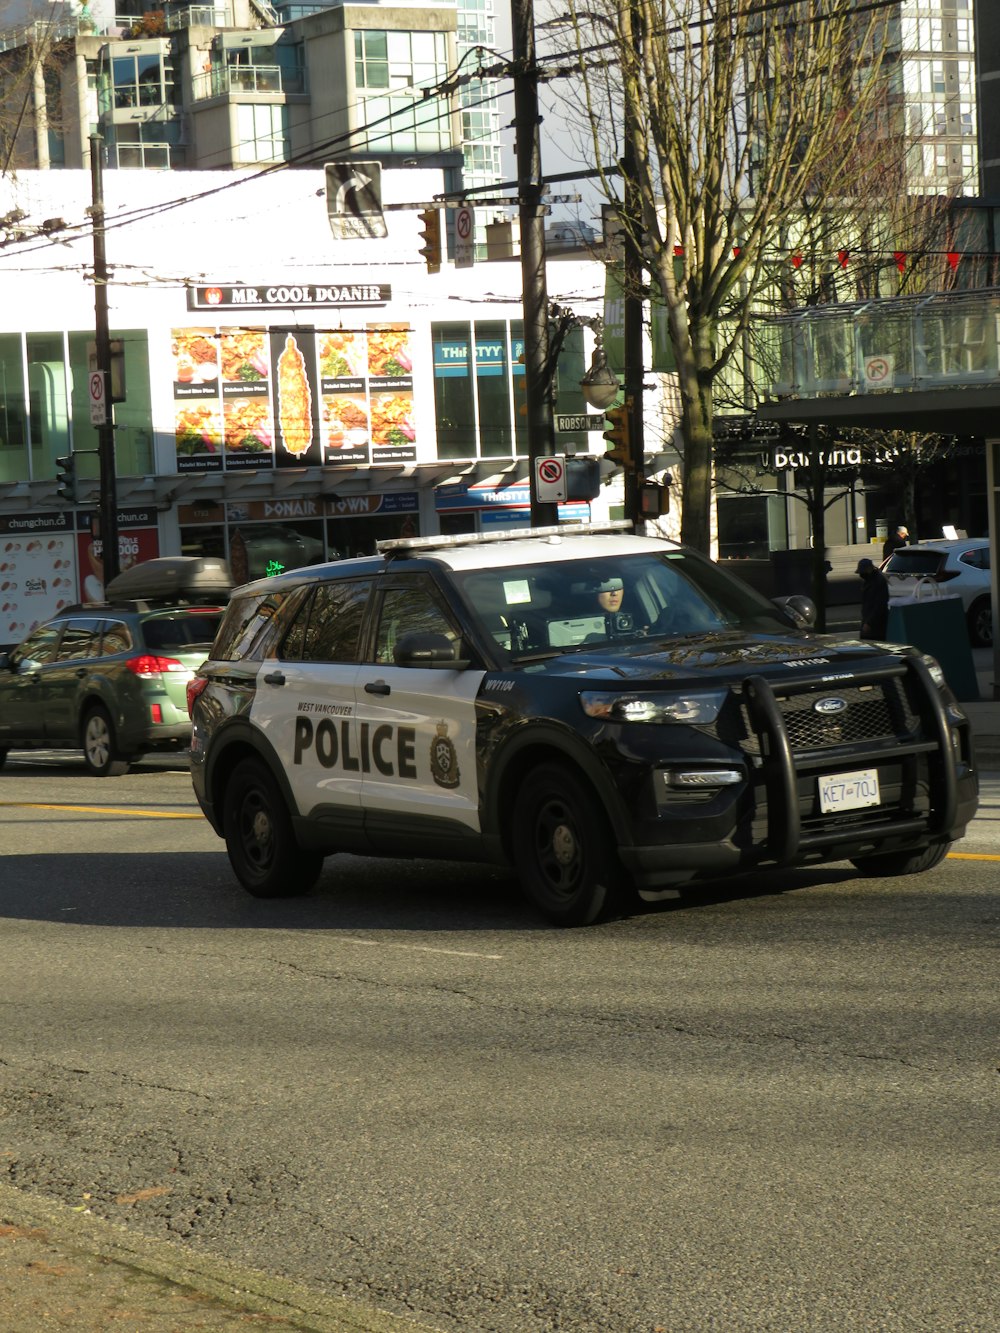 a police car driving down a street next to tall buildings